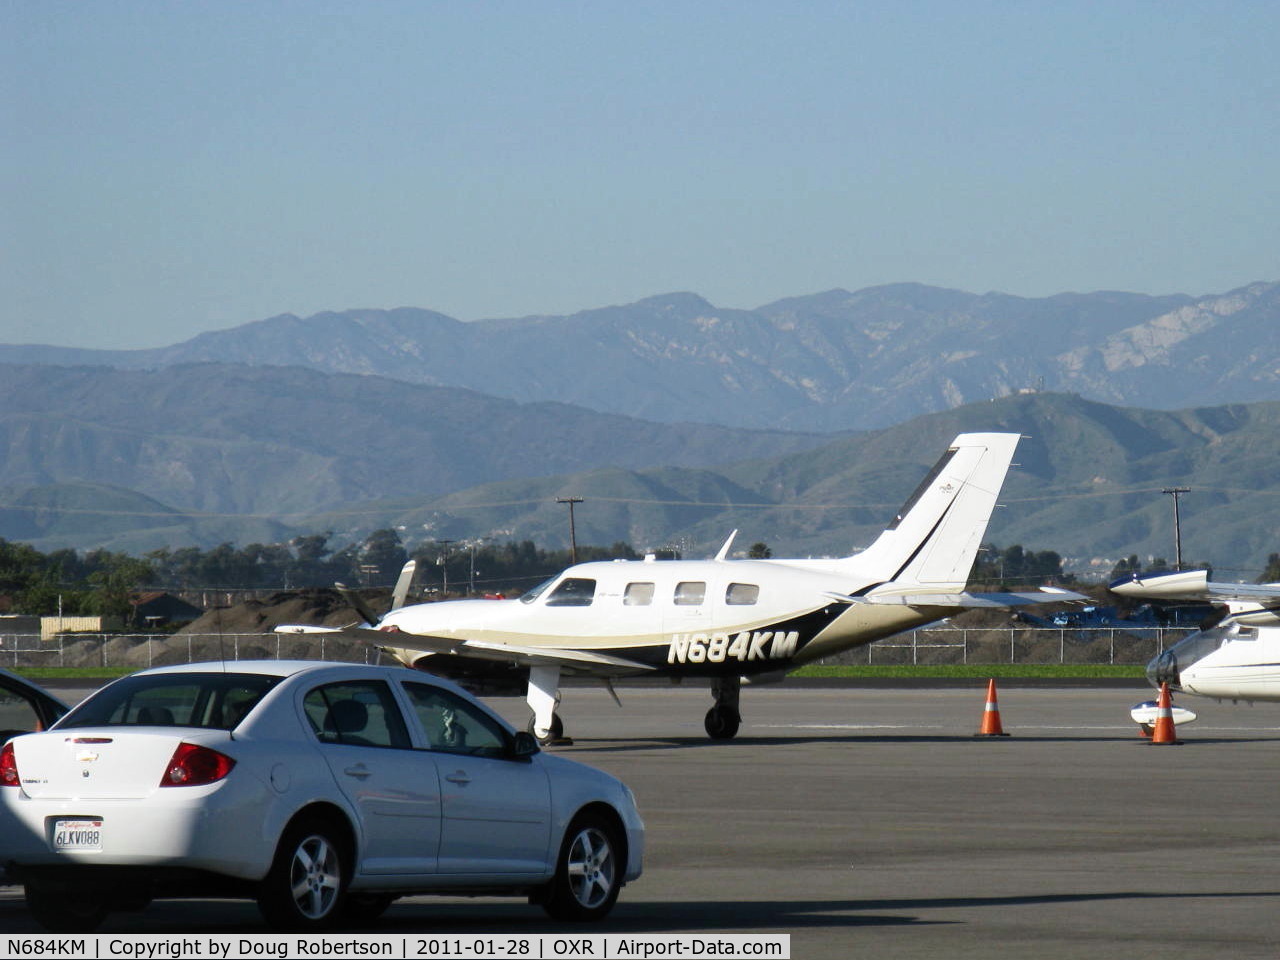 N684KM, 2008 Piper PA-46-500TP C/N 4697353, 2008 Piper PA-46-500TP MALIBU MERIDIAN, one P&W(C)PT6A-42A Turboprop 1,029 shp flat rated at 500 shp continuous, Pressurized.